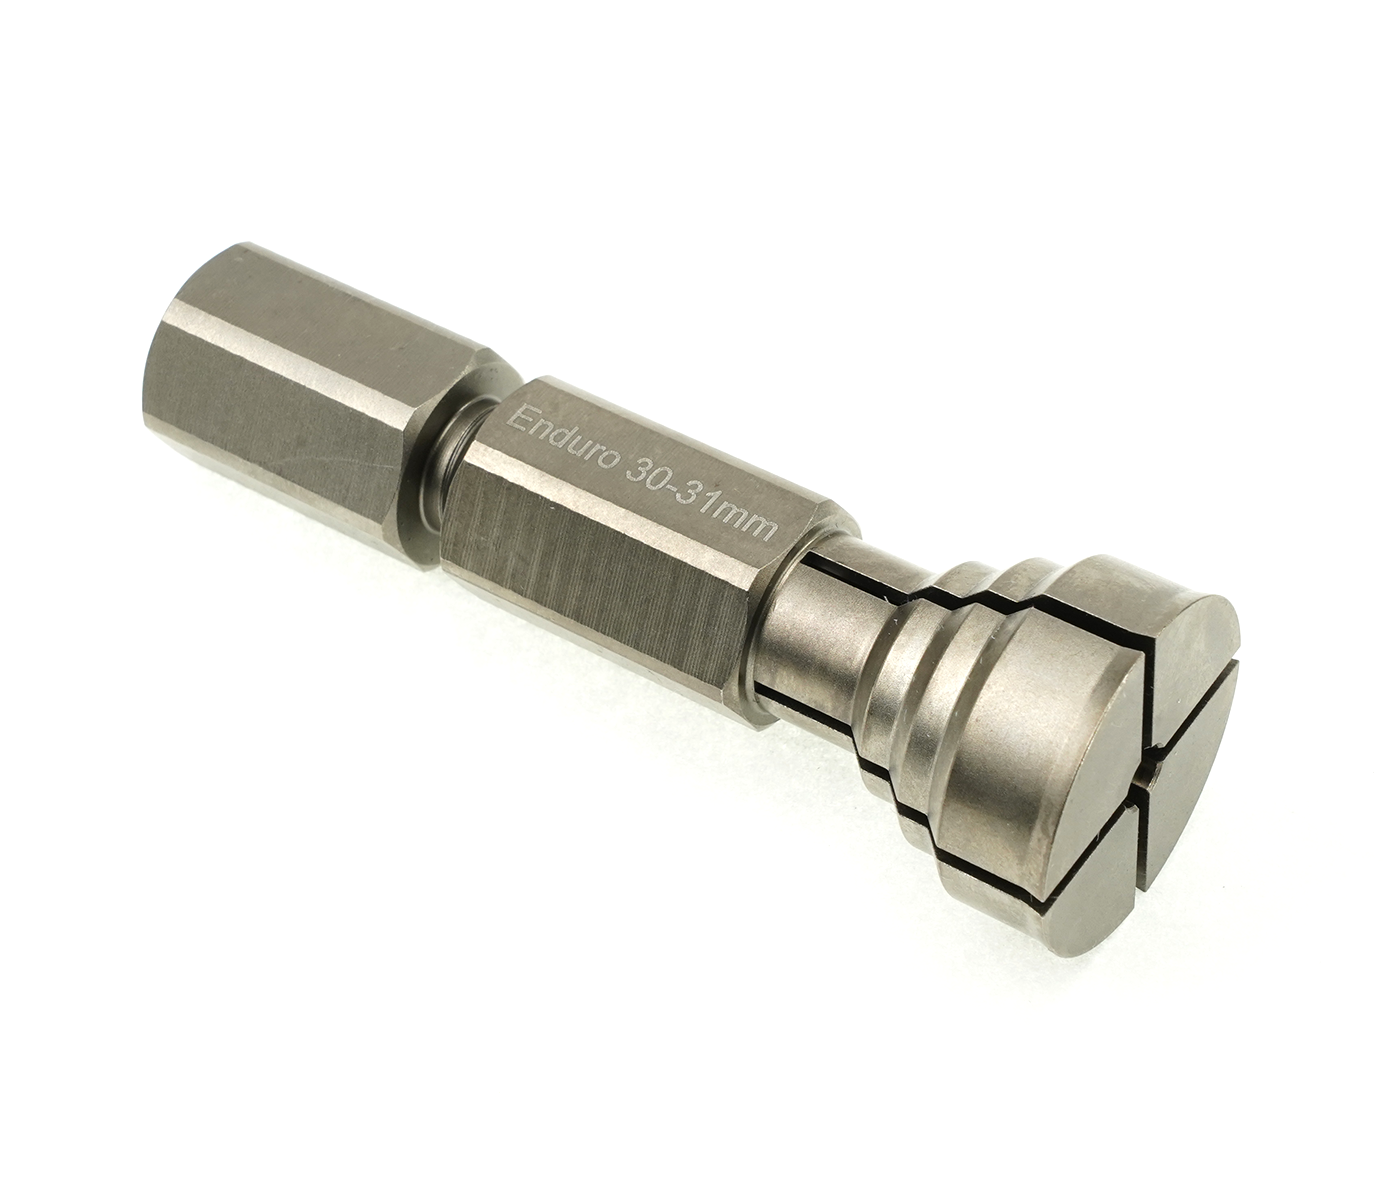 Enduro Puller 30-31 SS - Stainless Steel, Bearing Puller for bearings with 30-31mm IDs